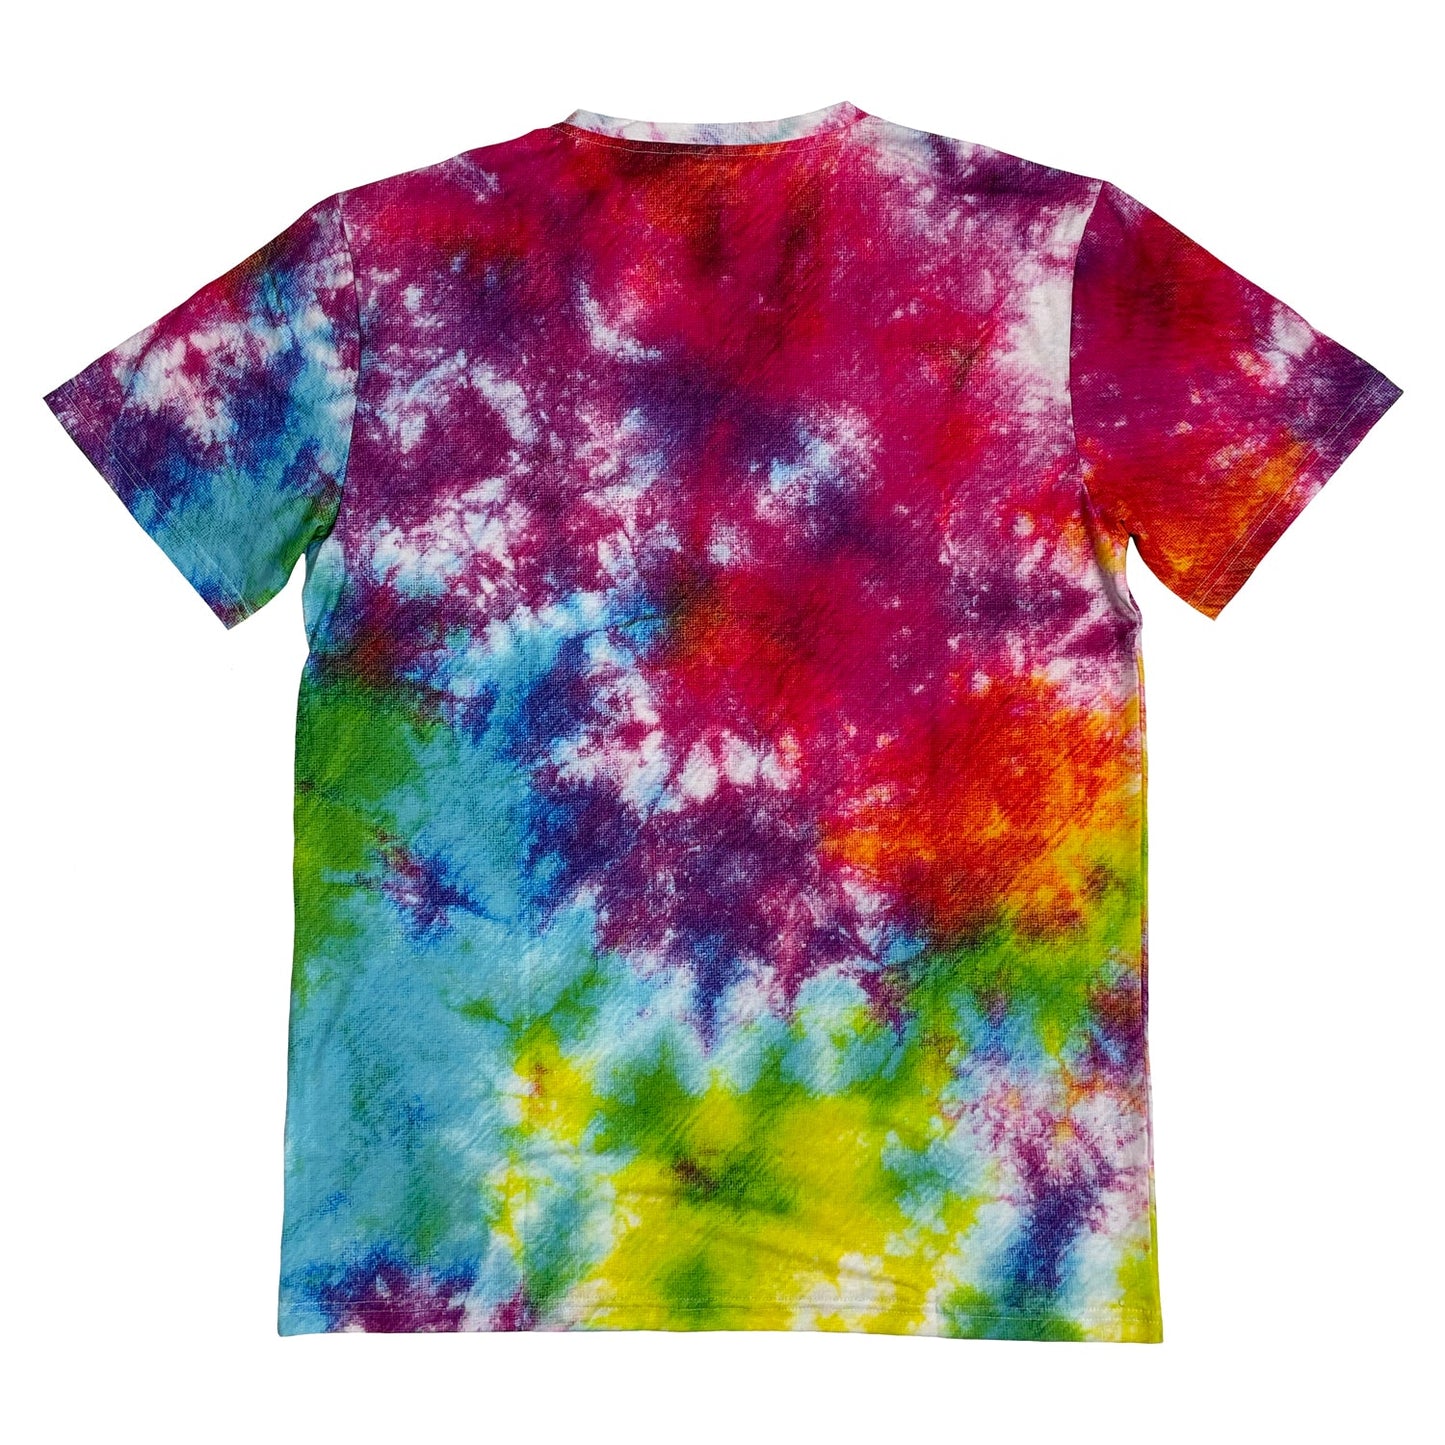 Perks and Re-creation Tie-Dye Jersey Disc Golf